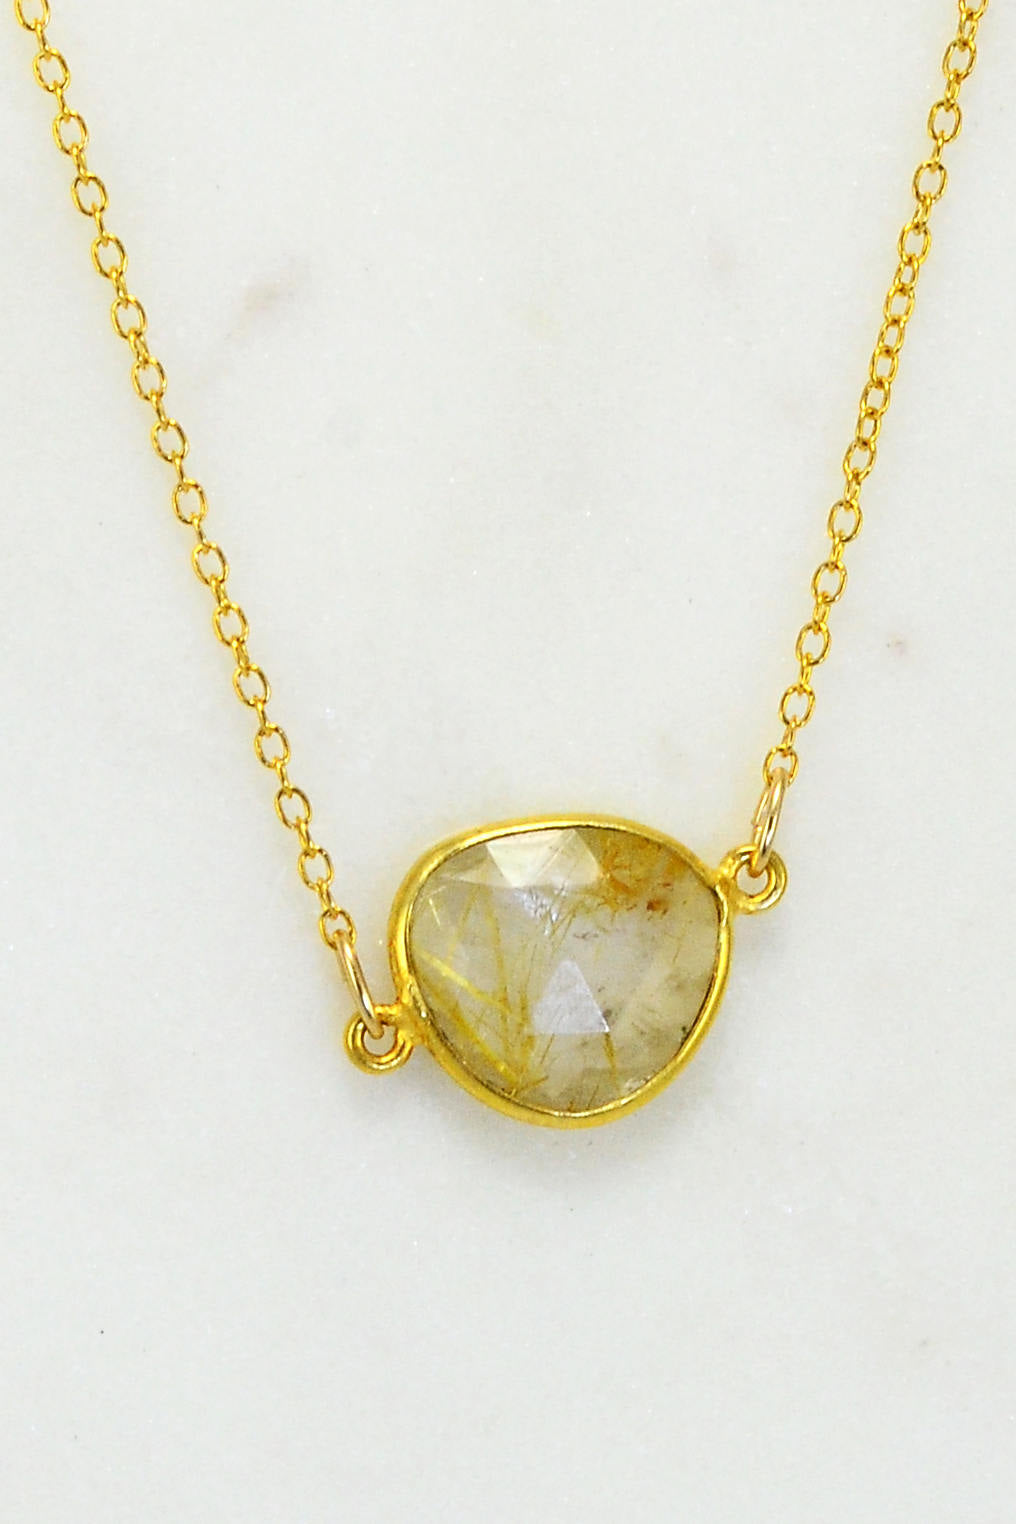 Delicate Gemstone Necklace - Moonstone Gold Filled- Tiny Stone Layered -  Urban Carats